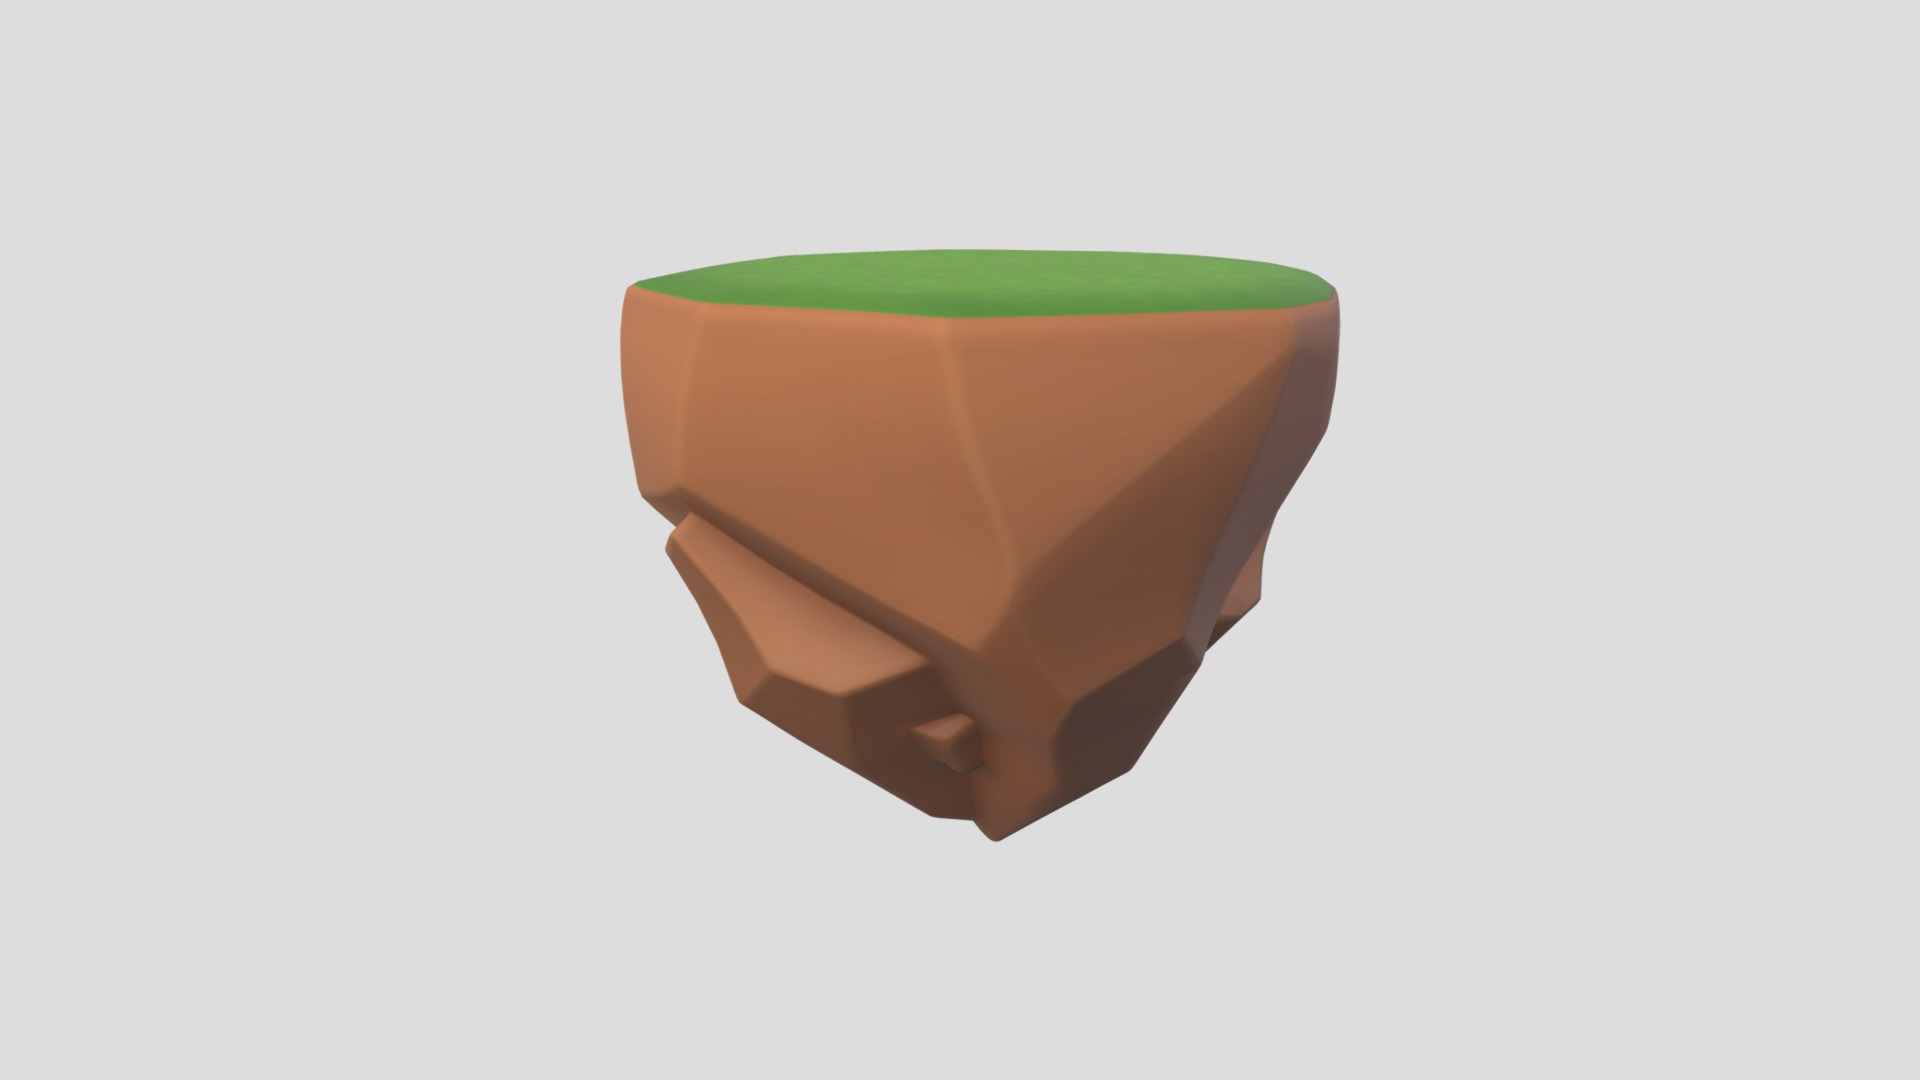 3D model Float Island - This is a 3D model of the Float Island. The 3D model is about a cup with a green lid.